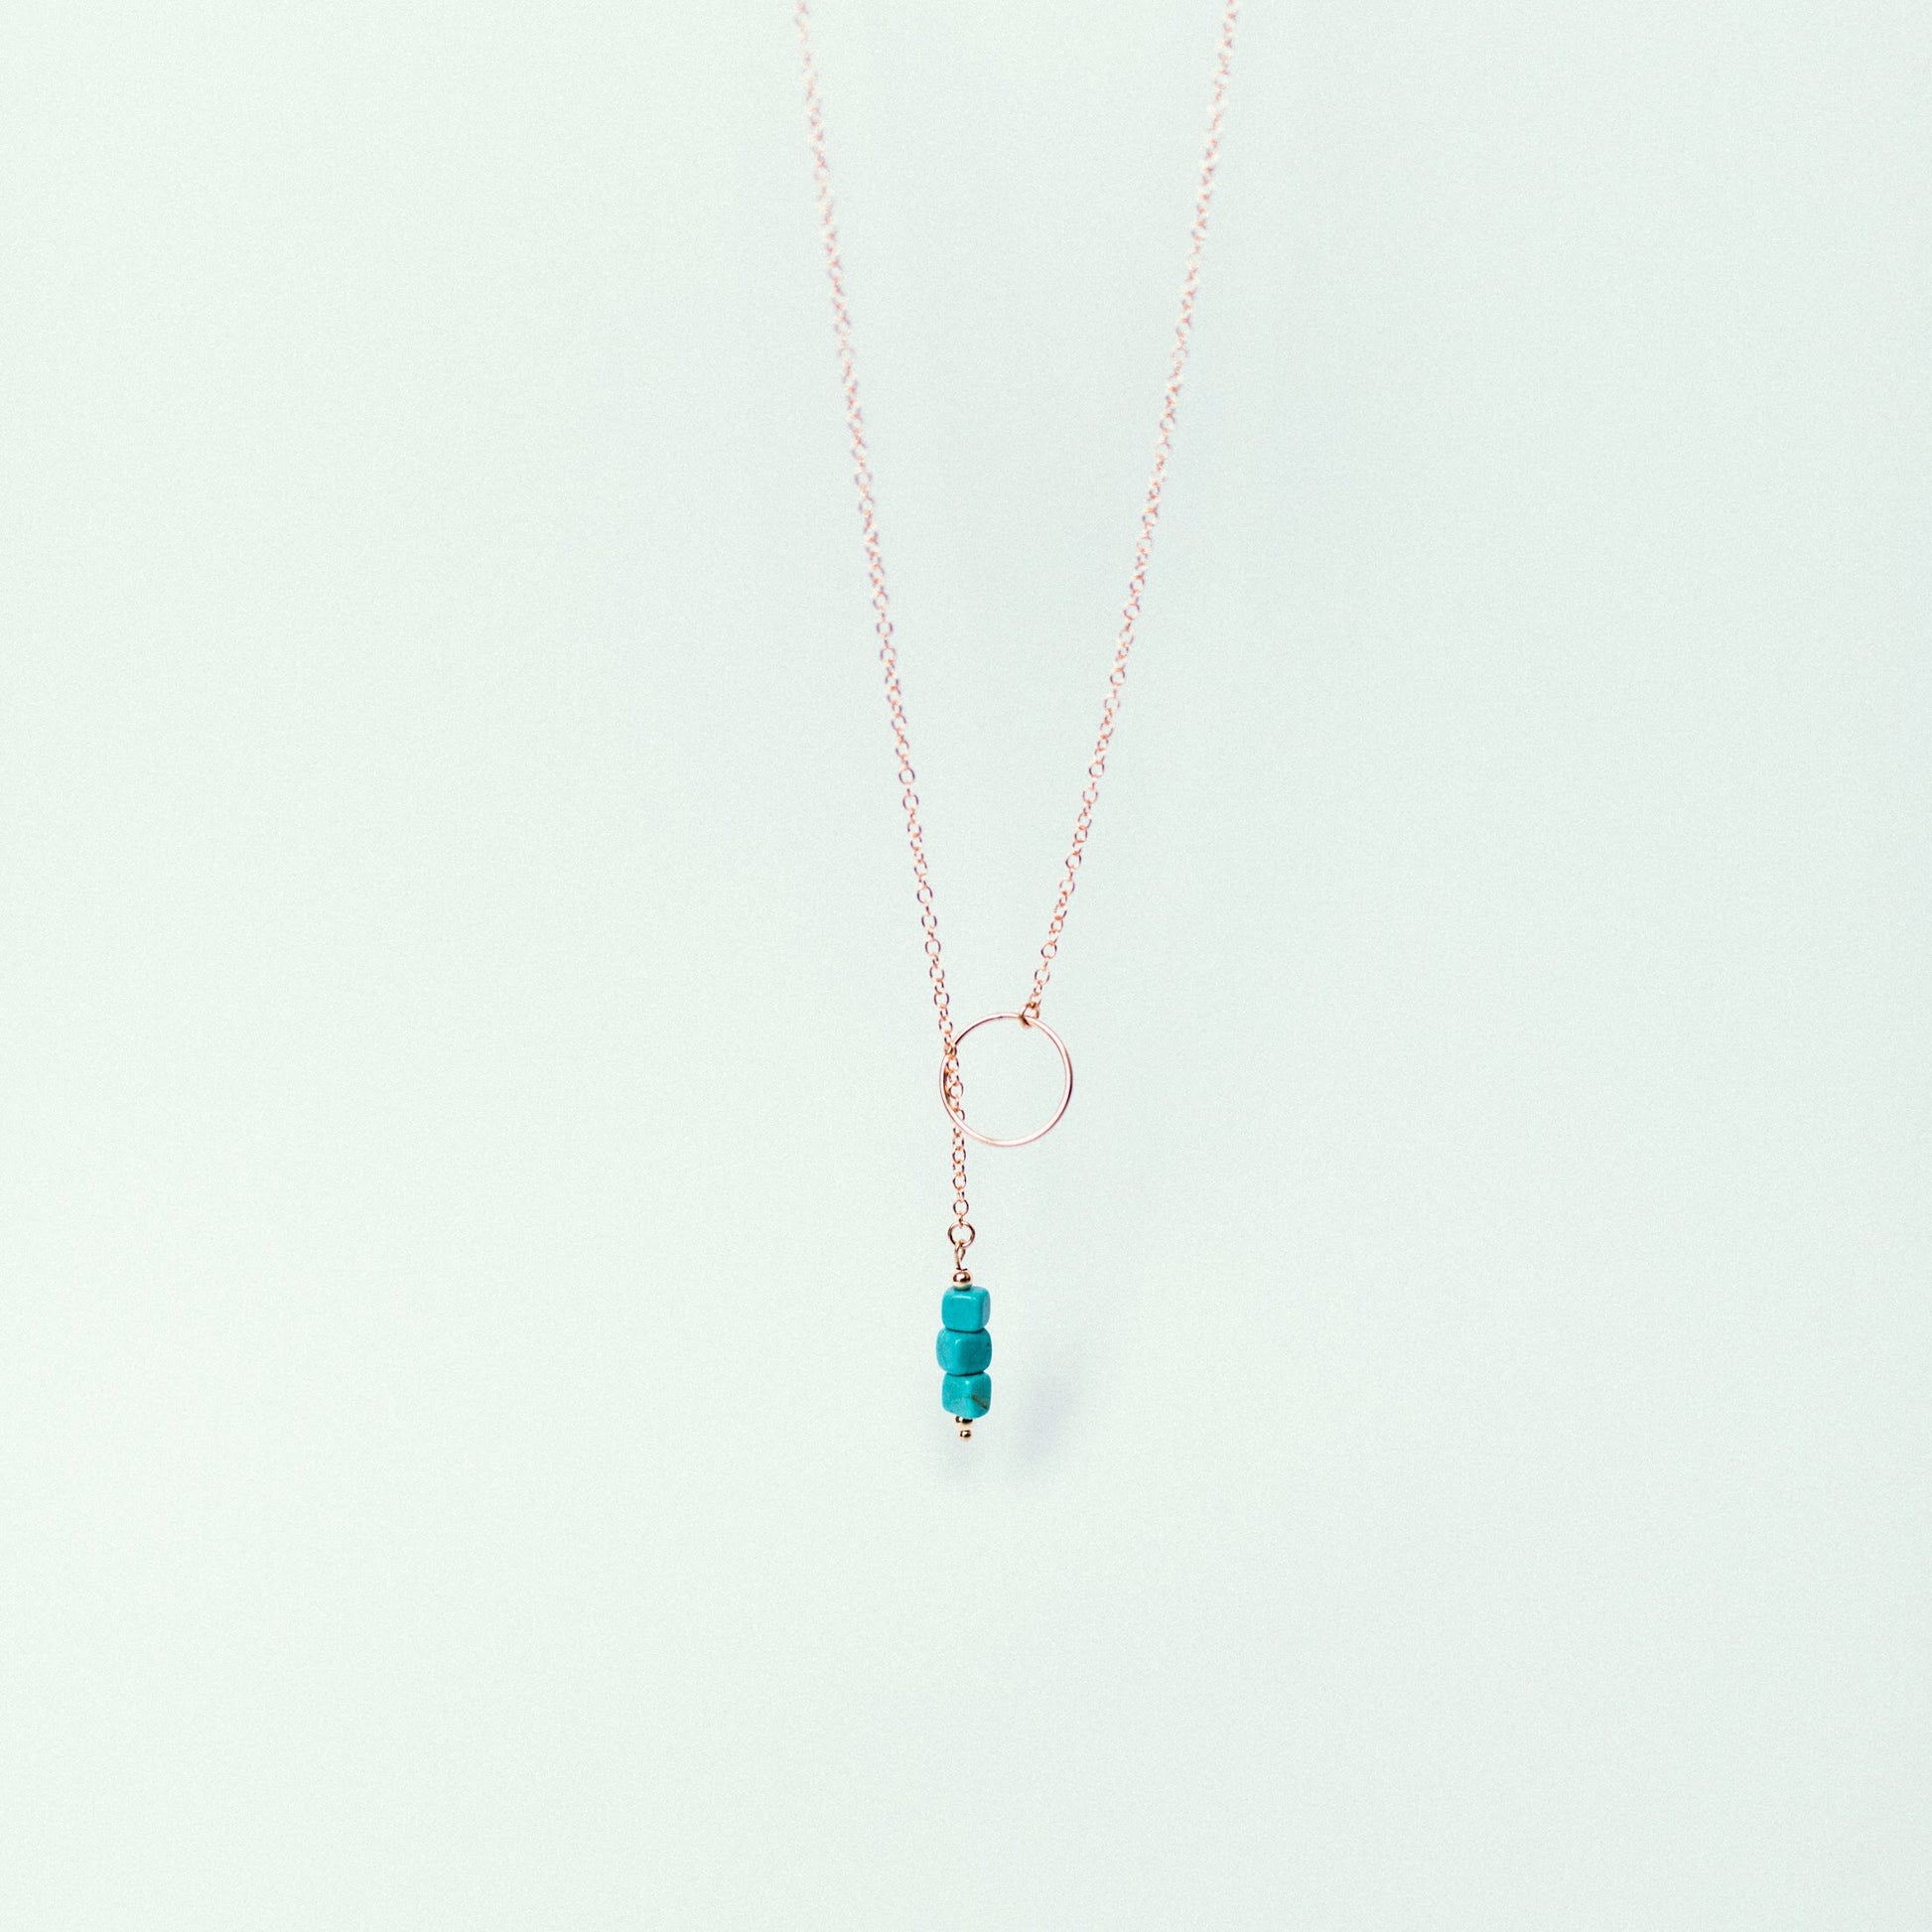 Turquoise necklace with adjustable length